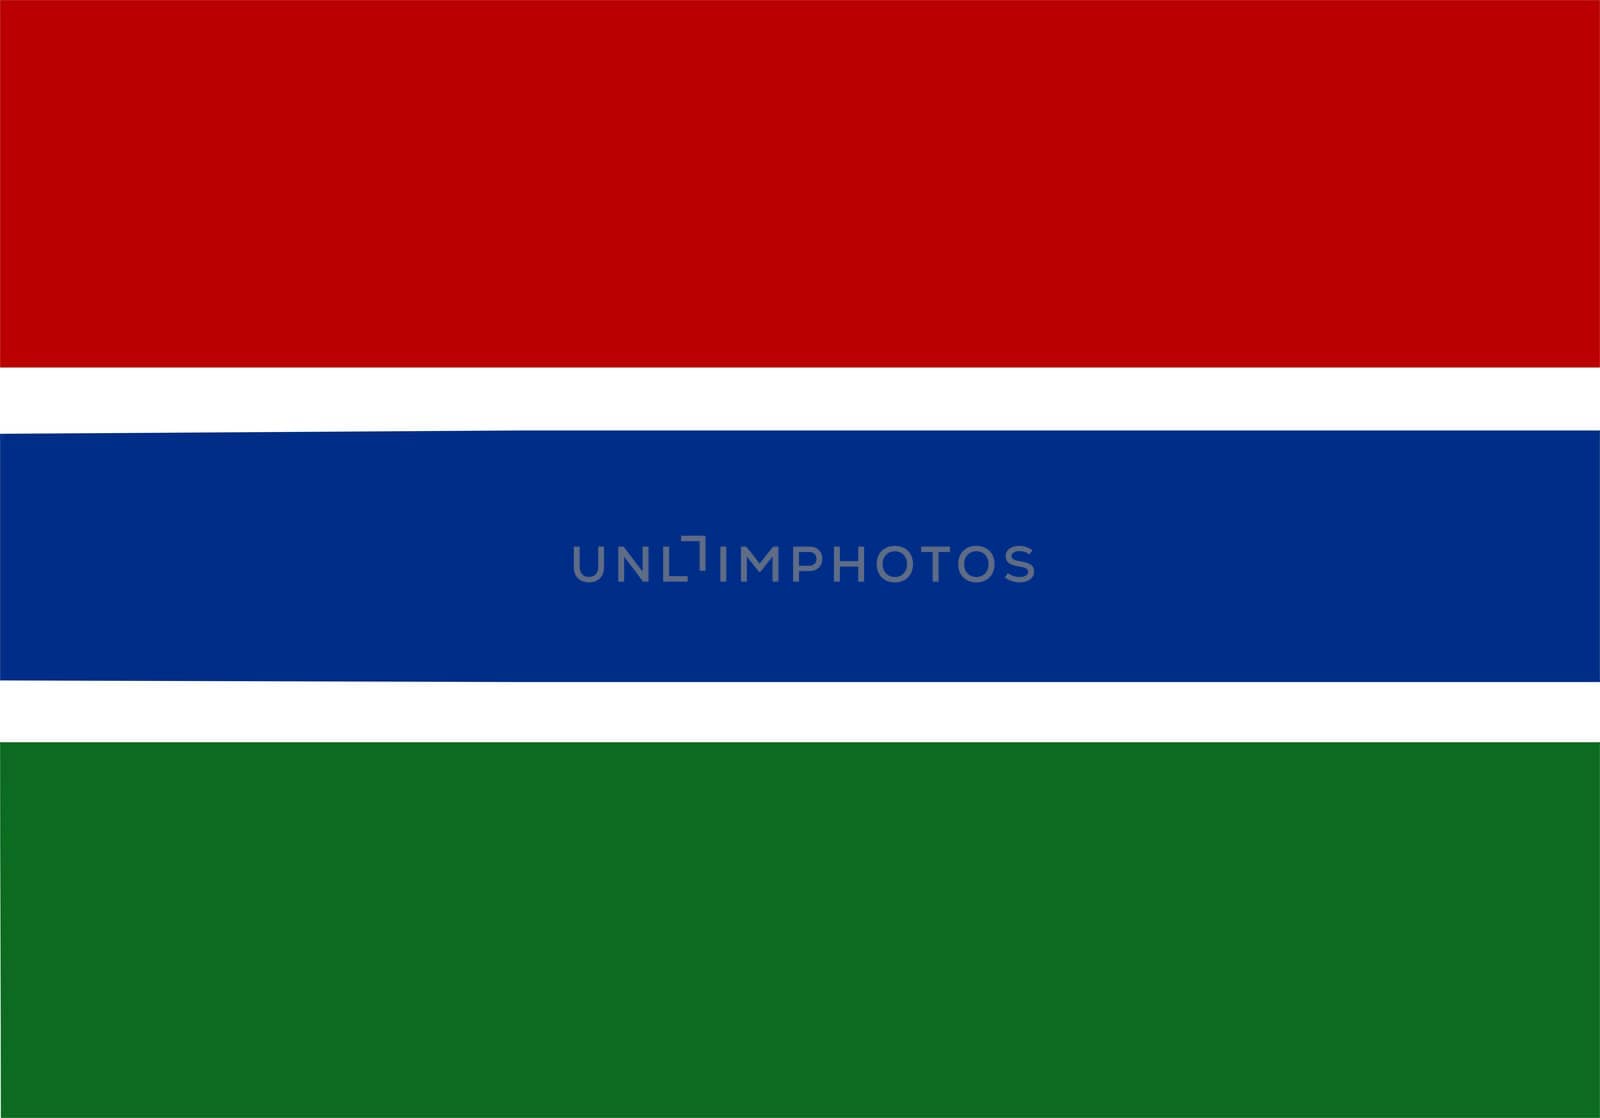 2D illustration of the flag of Gambia